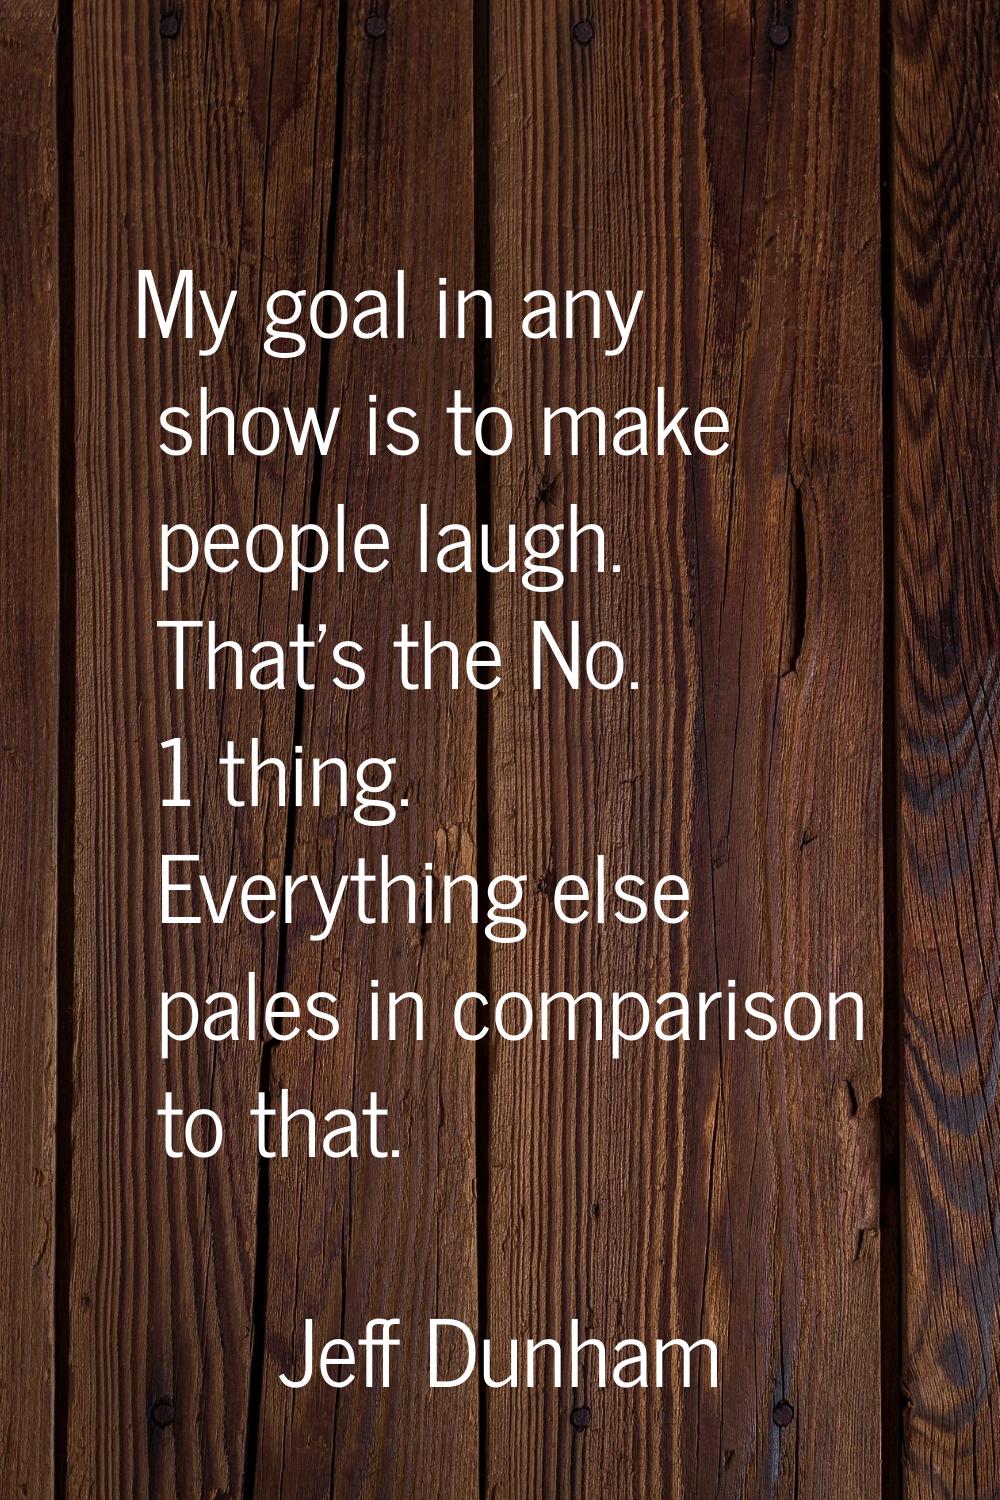 My goal in any show is to make people laugh. That's the No. 1 thing. Everything else pales in compa